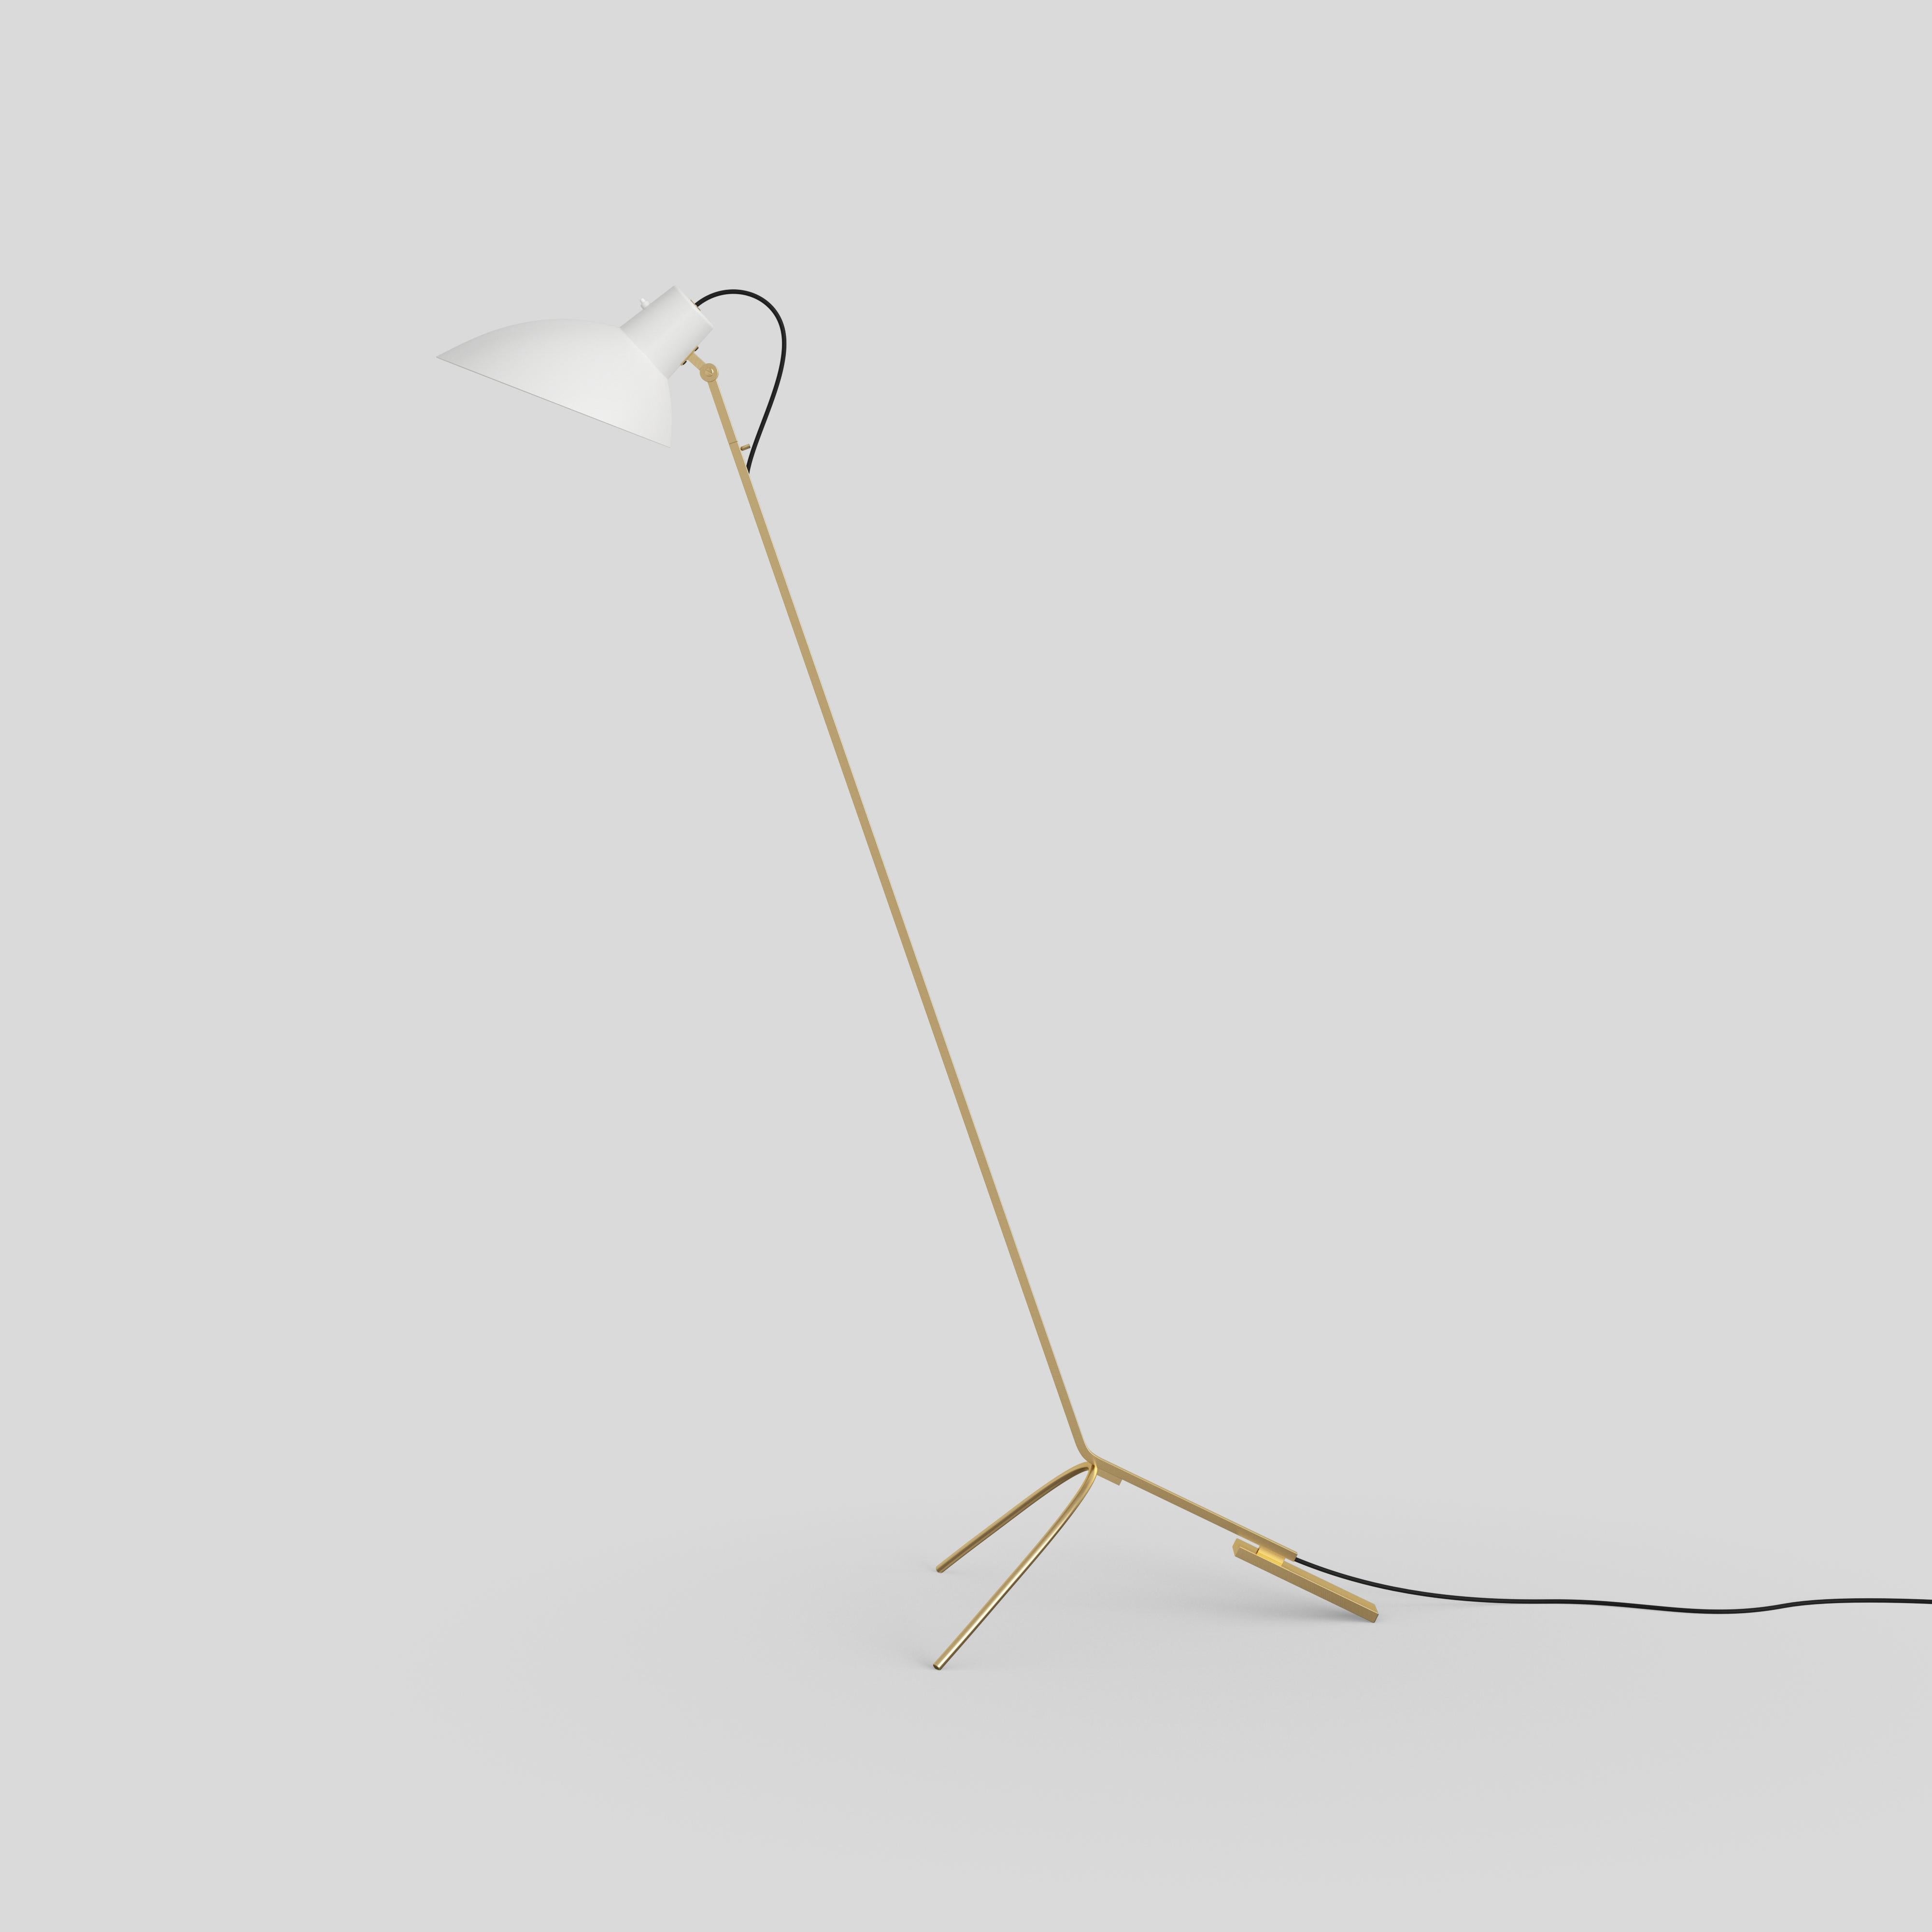 VV Cinquanta floor lamp.
Design by Vittoriano Viganò.
This version is with white lacquered reflector and brass frame.

The VV Cinquanta features an elegant and versatile posable direct light source that can swivel and tilt, from direct working